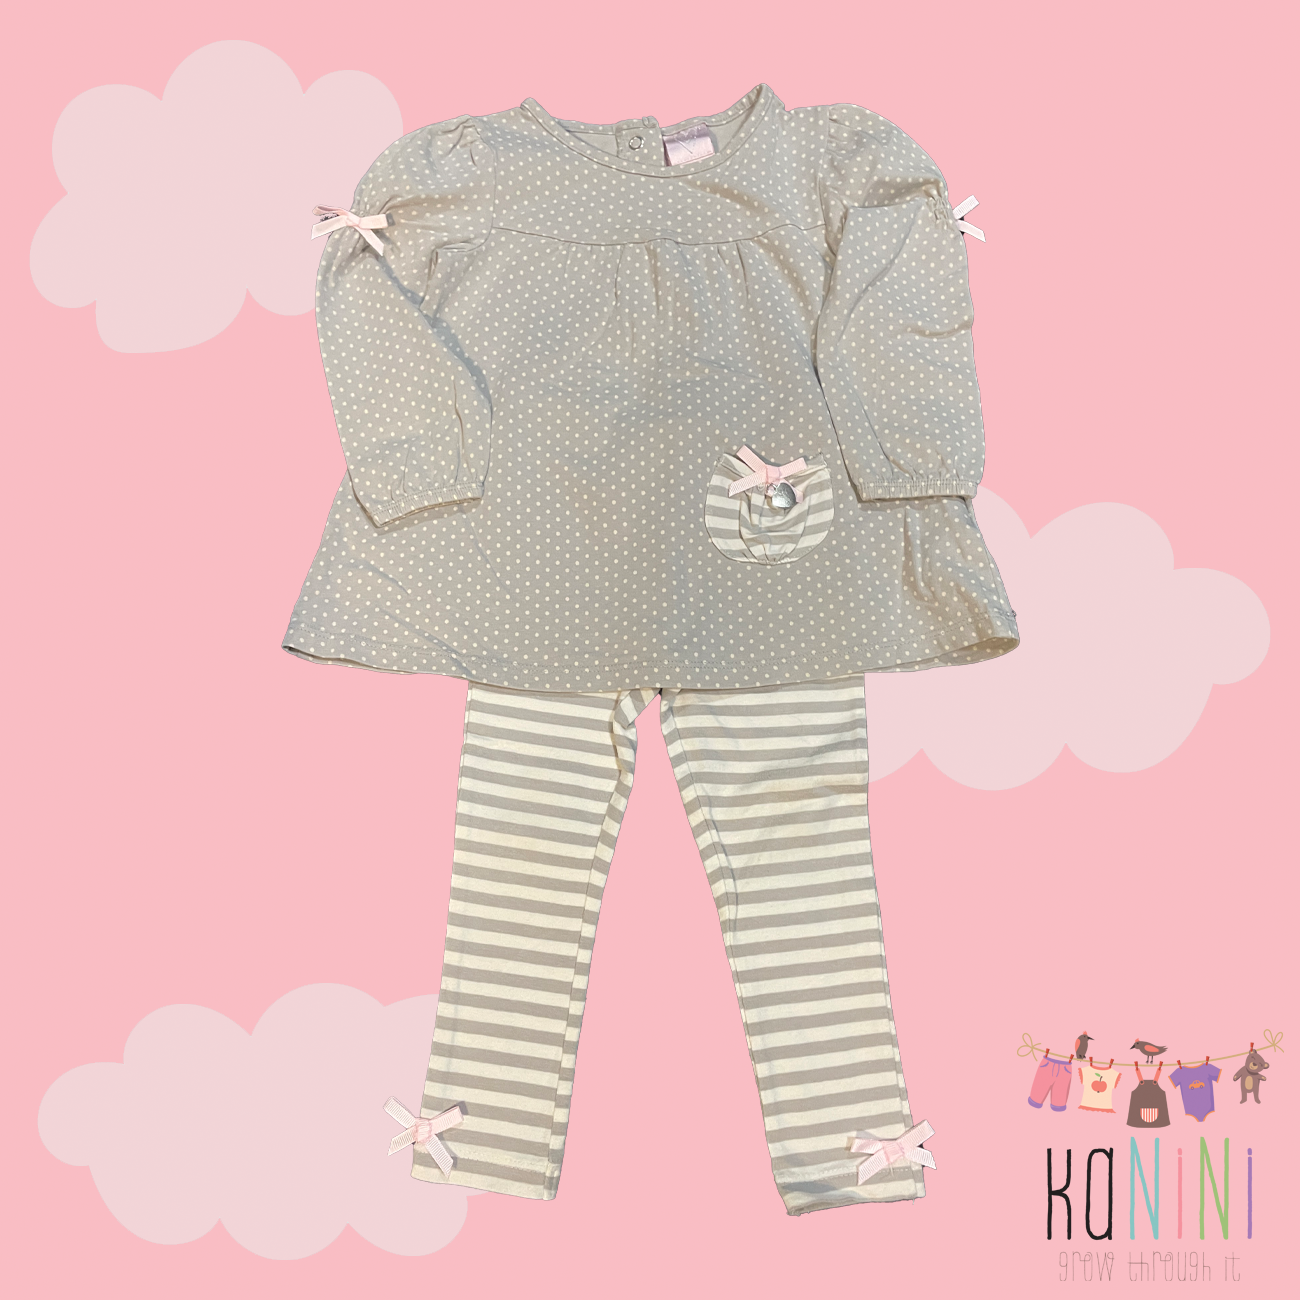 Featured image for “[Unbranded] 9 - 12 Months Girls Top & Leggings Set”